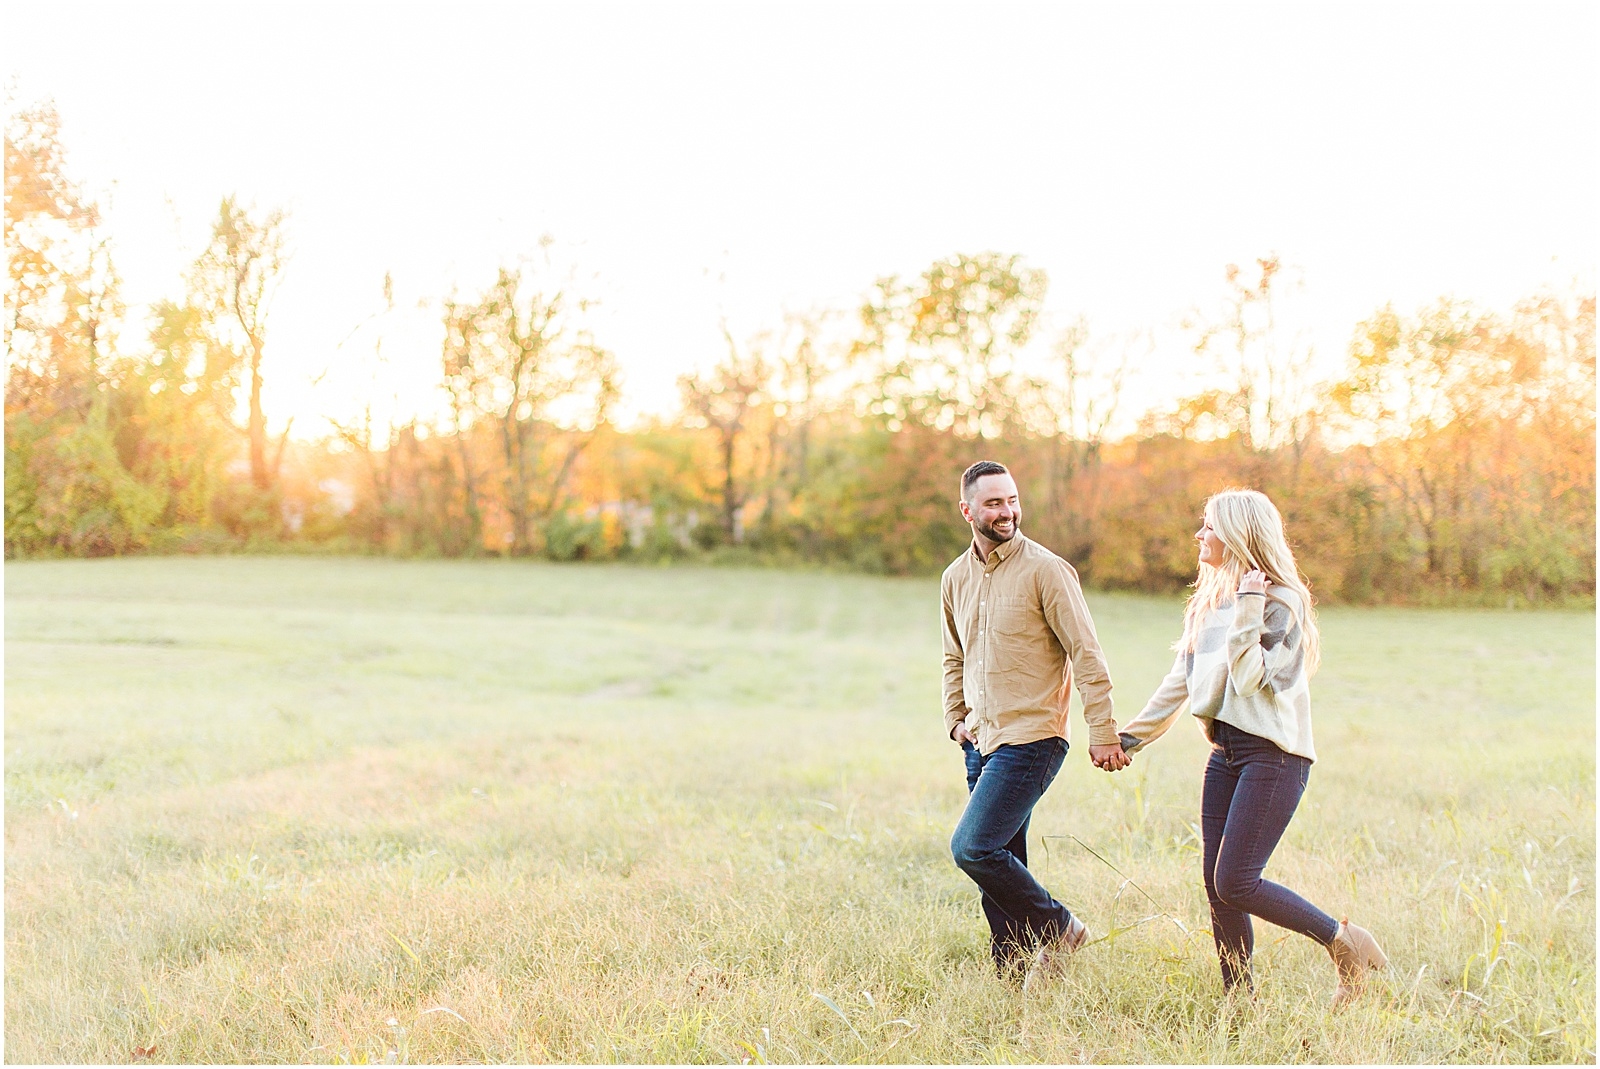 A Southern Indiana Engagement Session | Charleston and Erin | Bret and Brandie Photography043.jpg